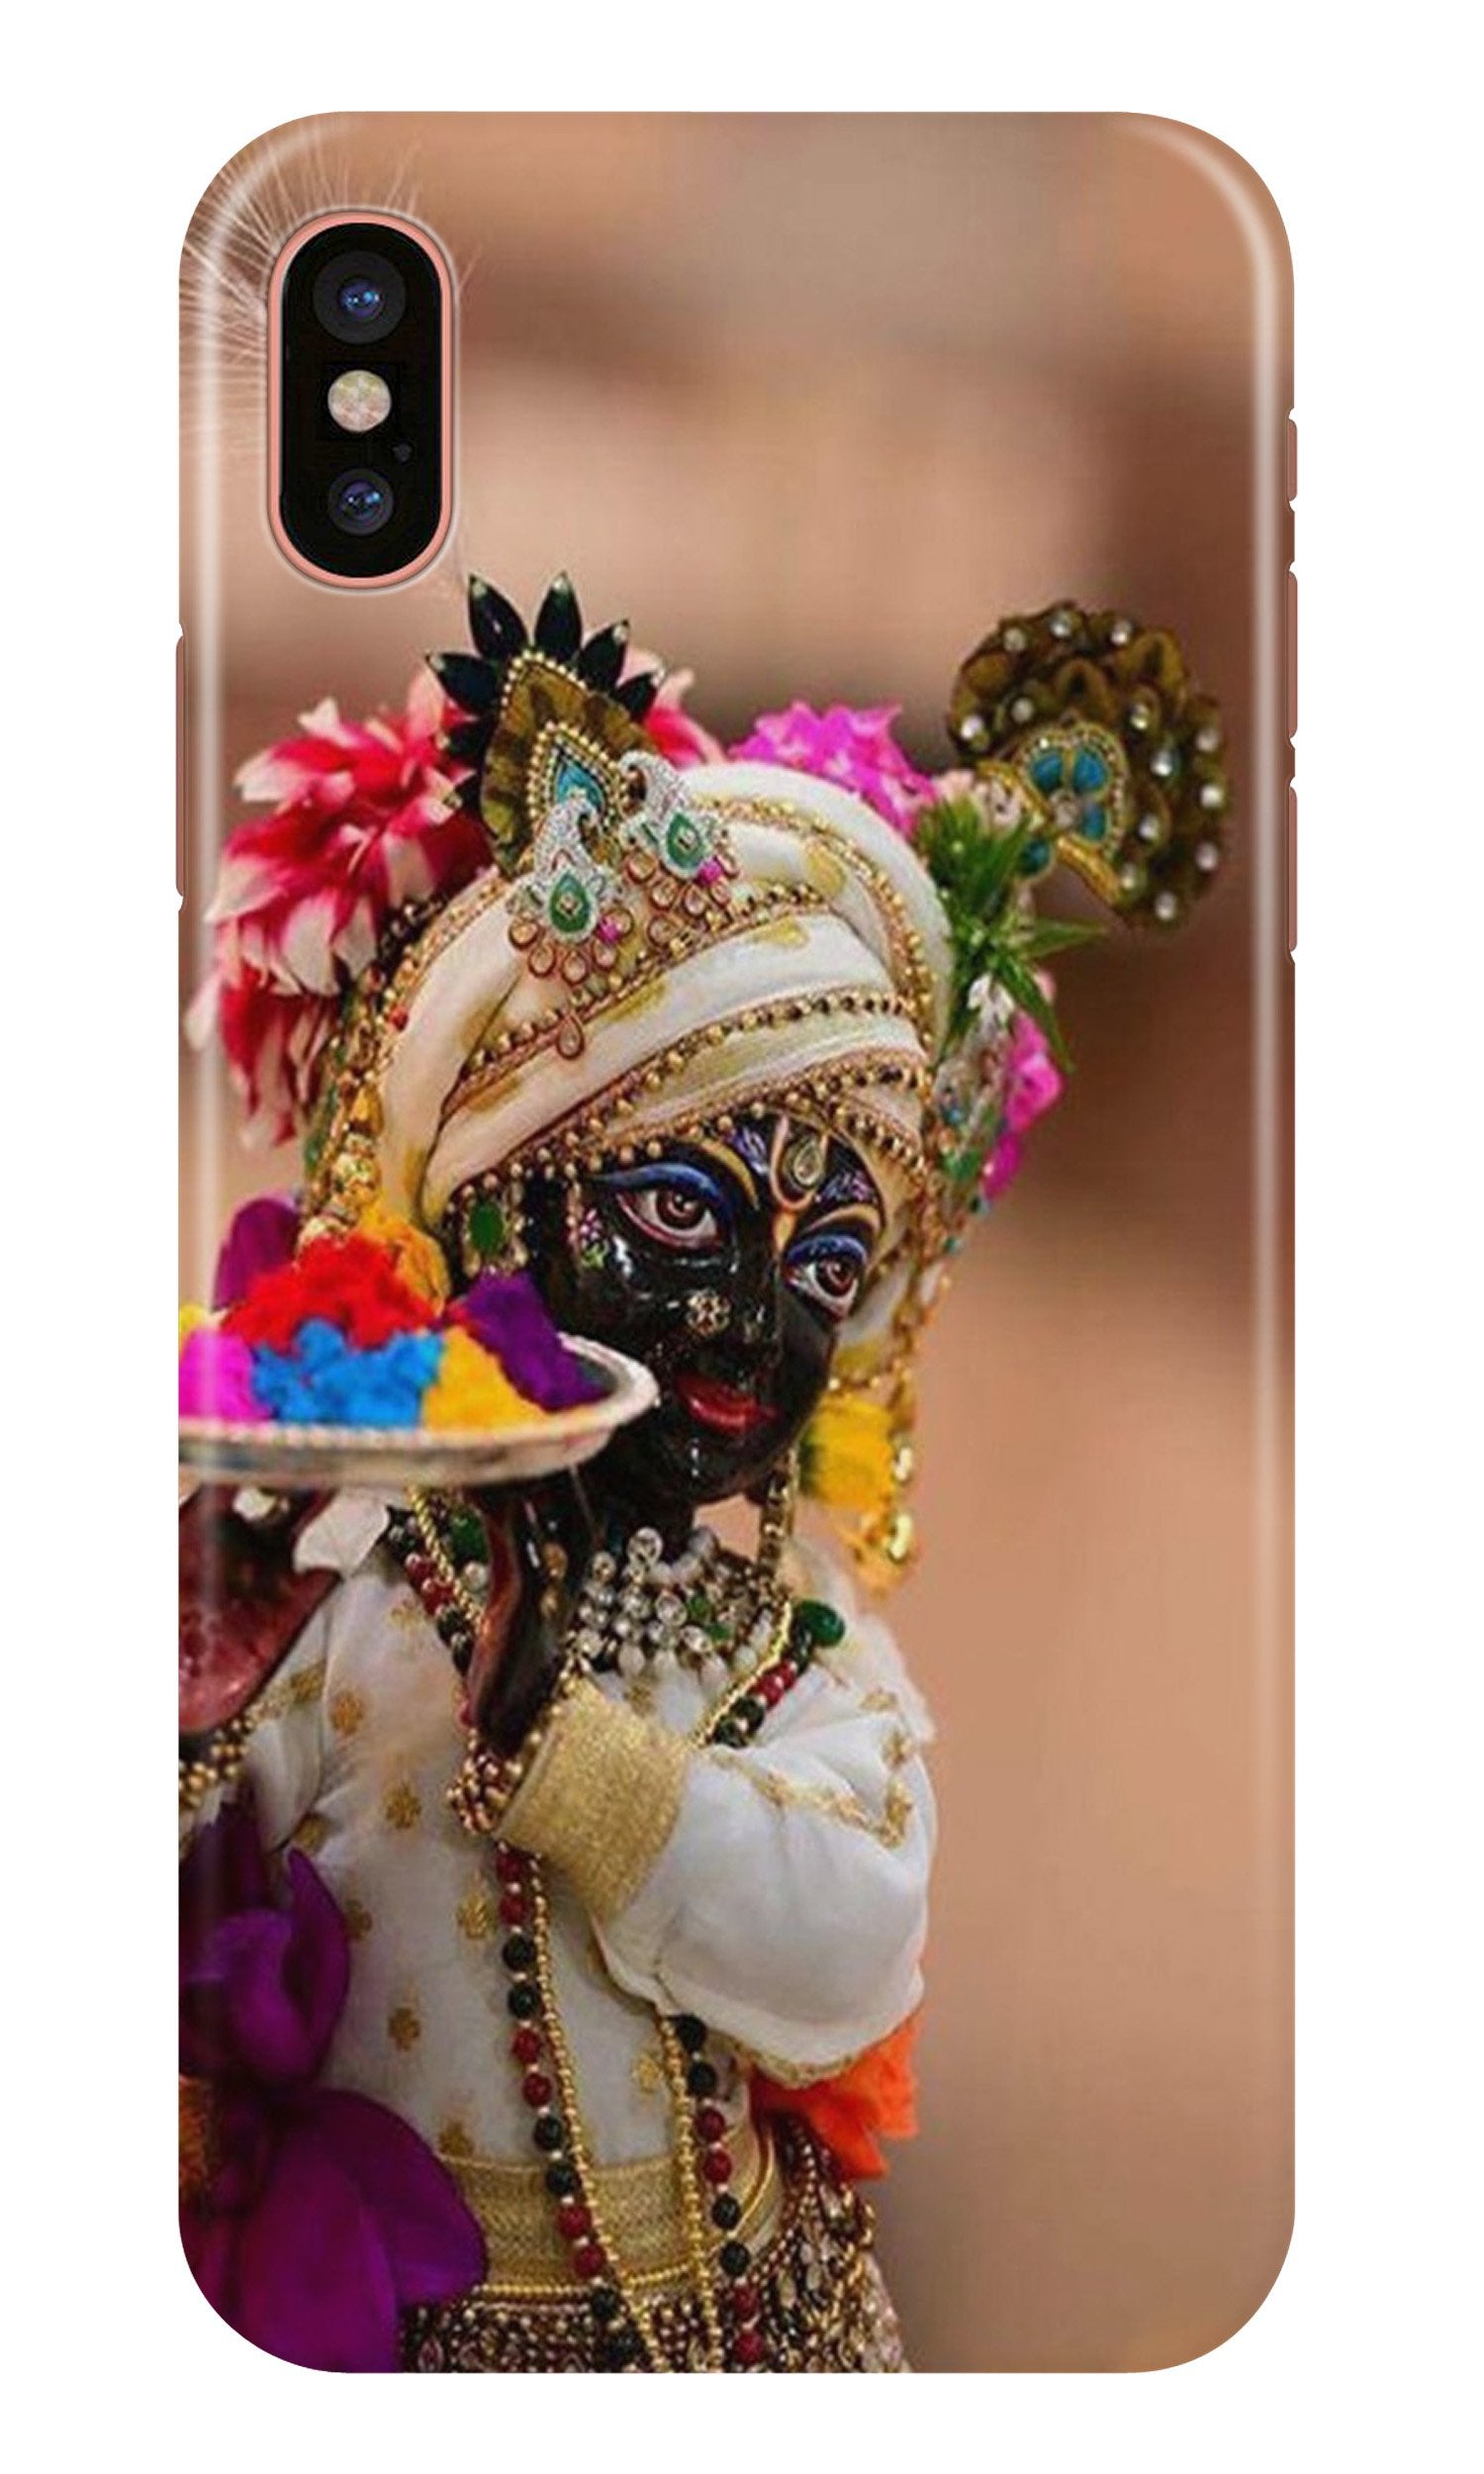 Lord Krishna2 Case for iPhone X